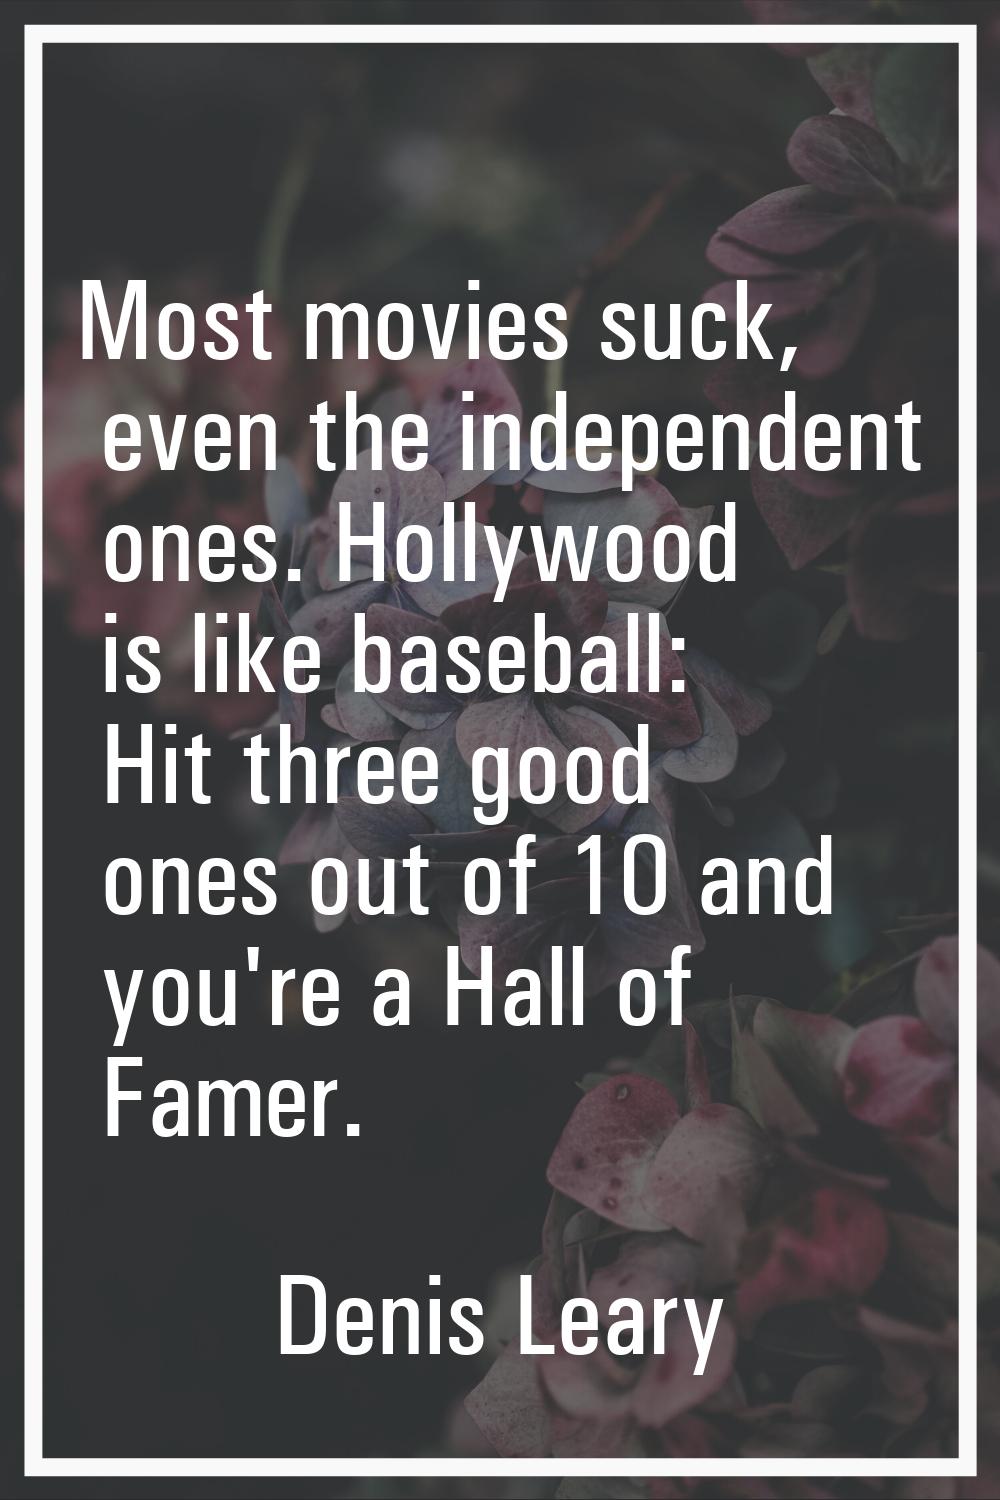 Most movies suck, even the independent ones. Hollywood is like baseball: Hit three good ones out of